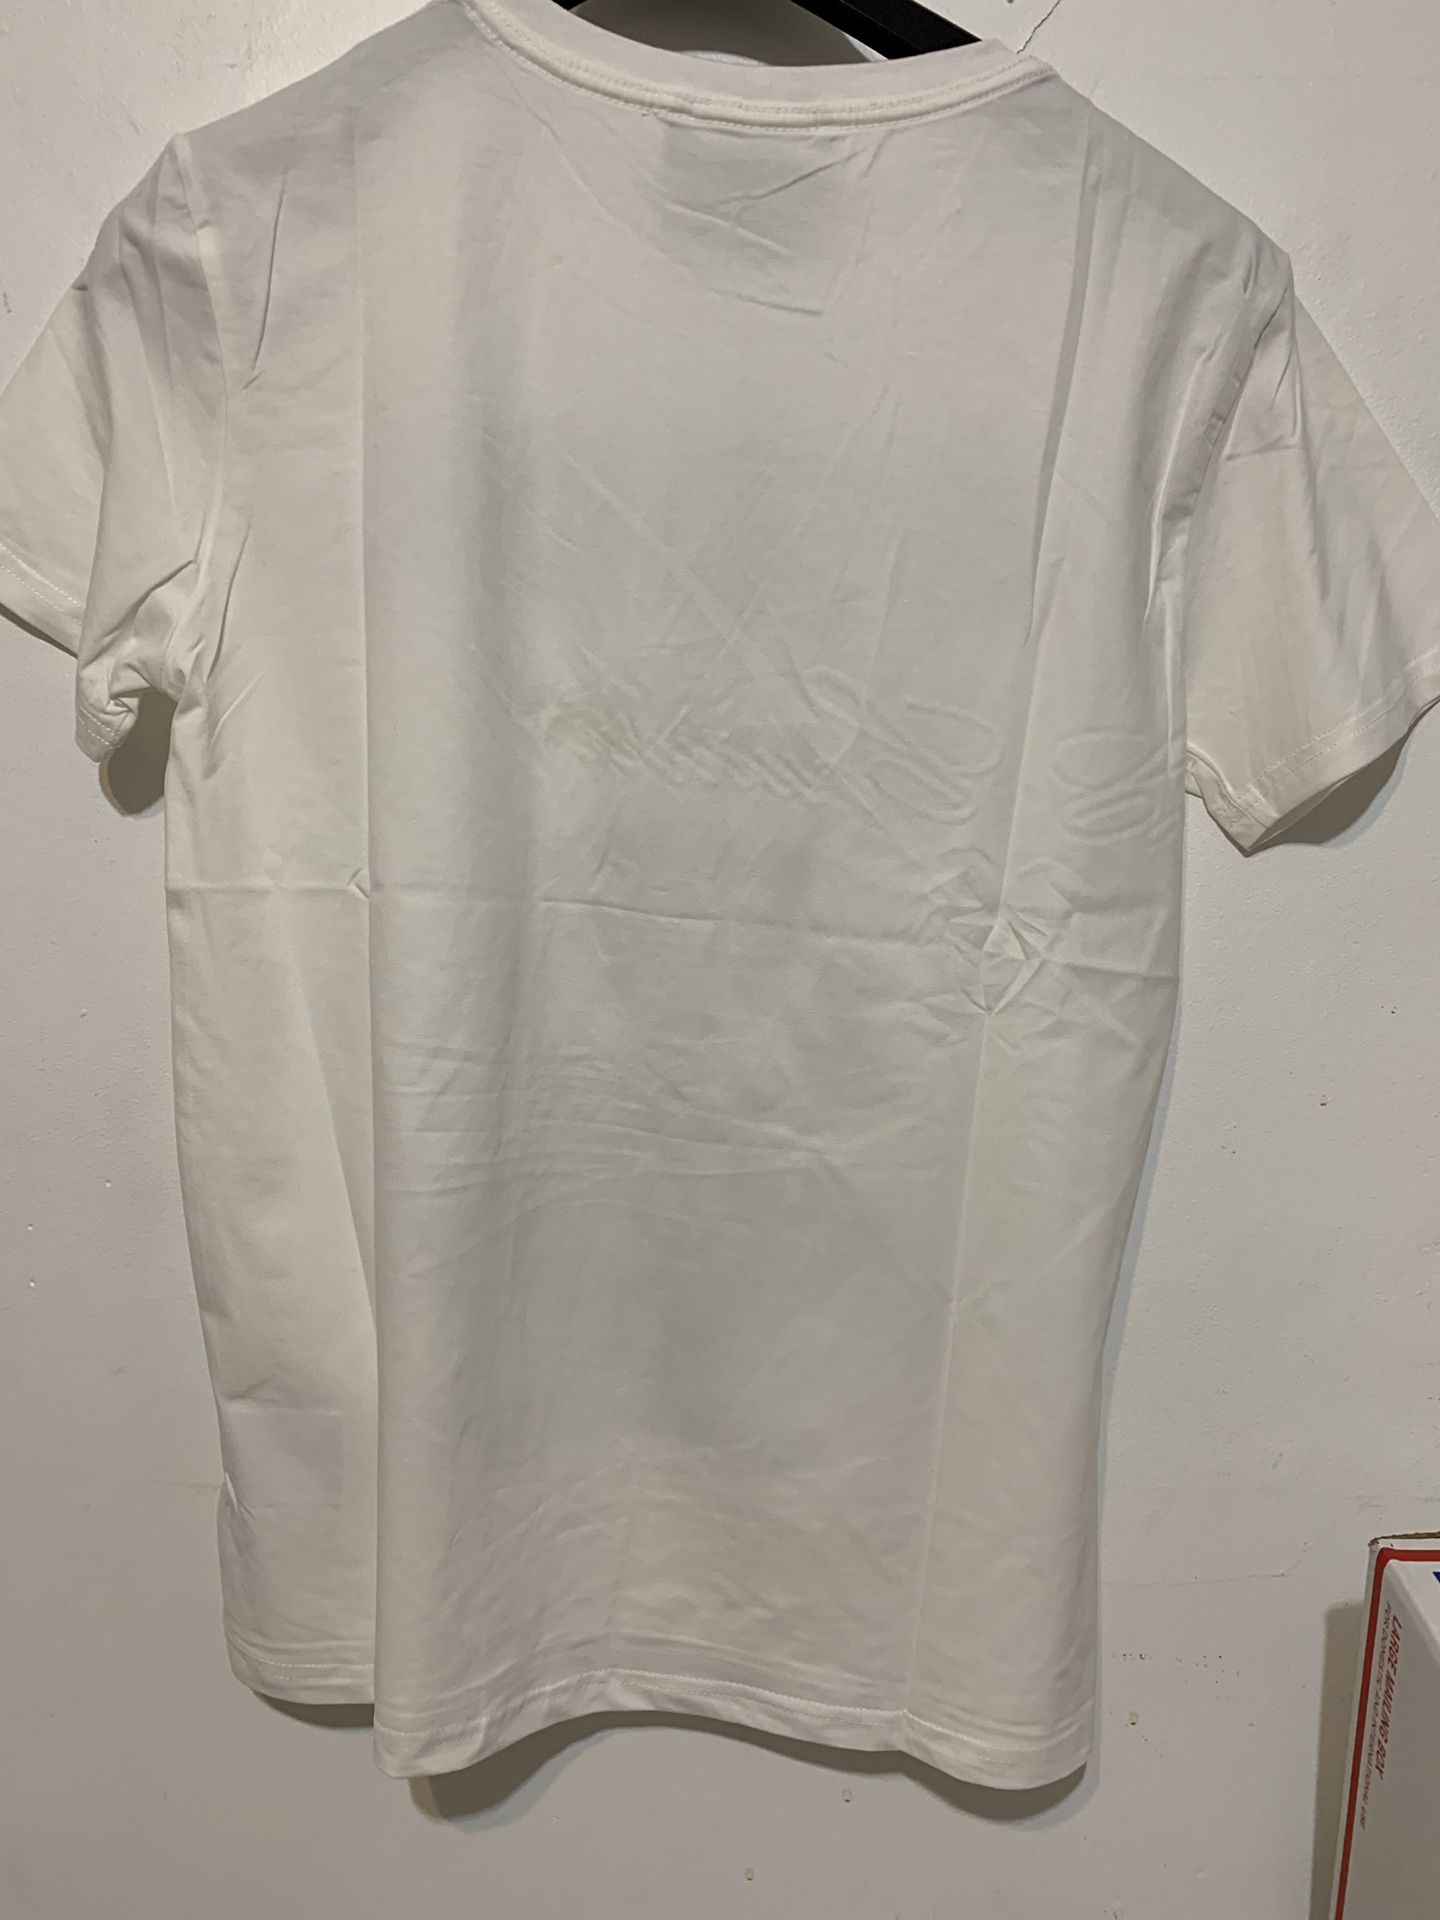 Moschino Bear Logo White T Shirt Style for Sale in Minneapolis, MN ...